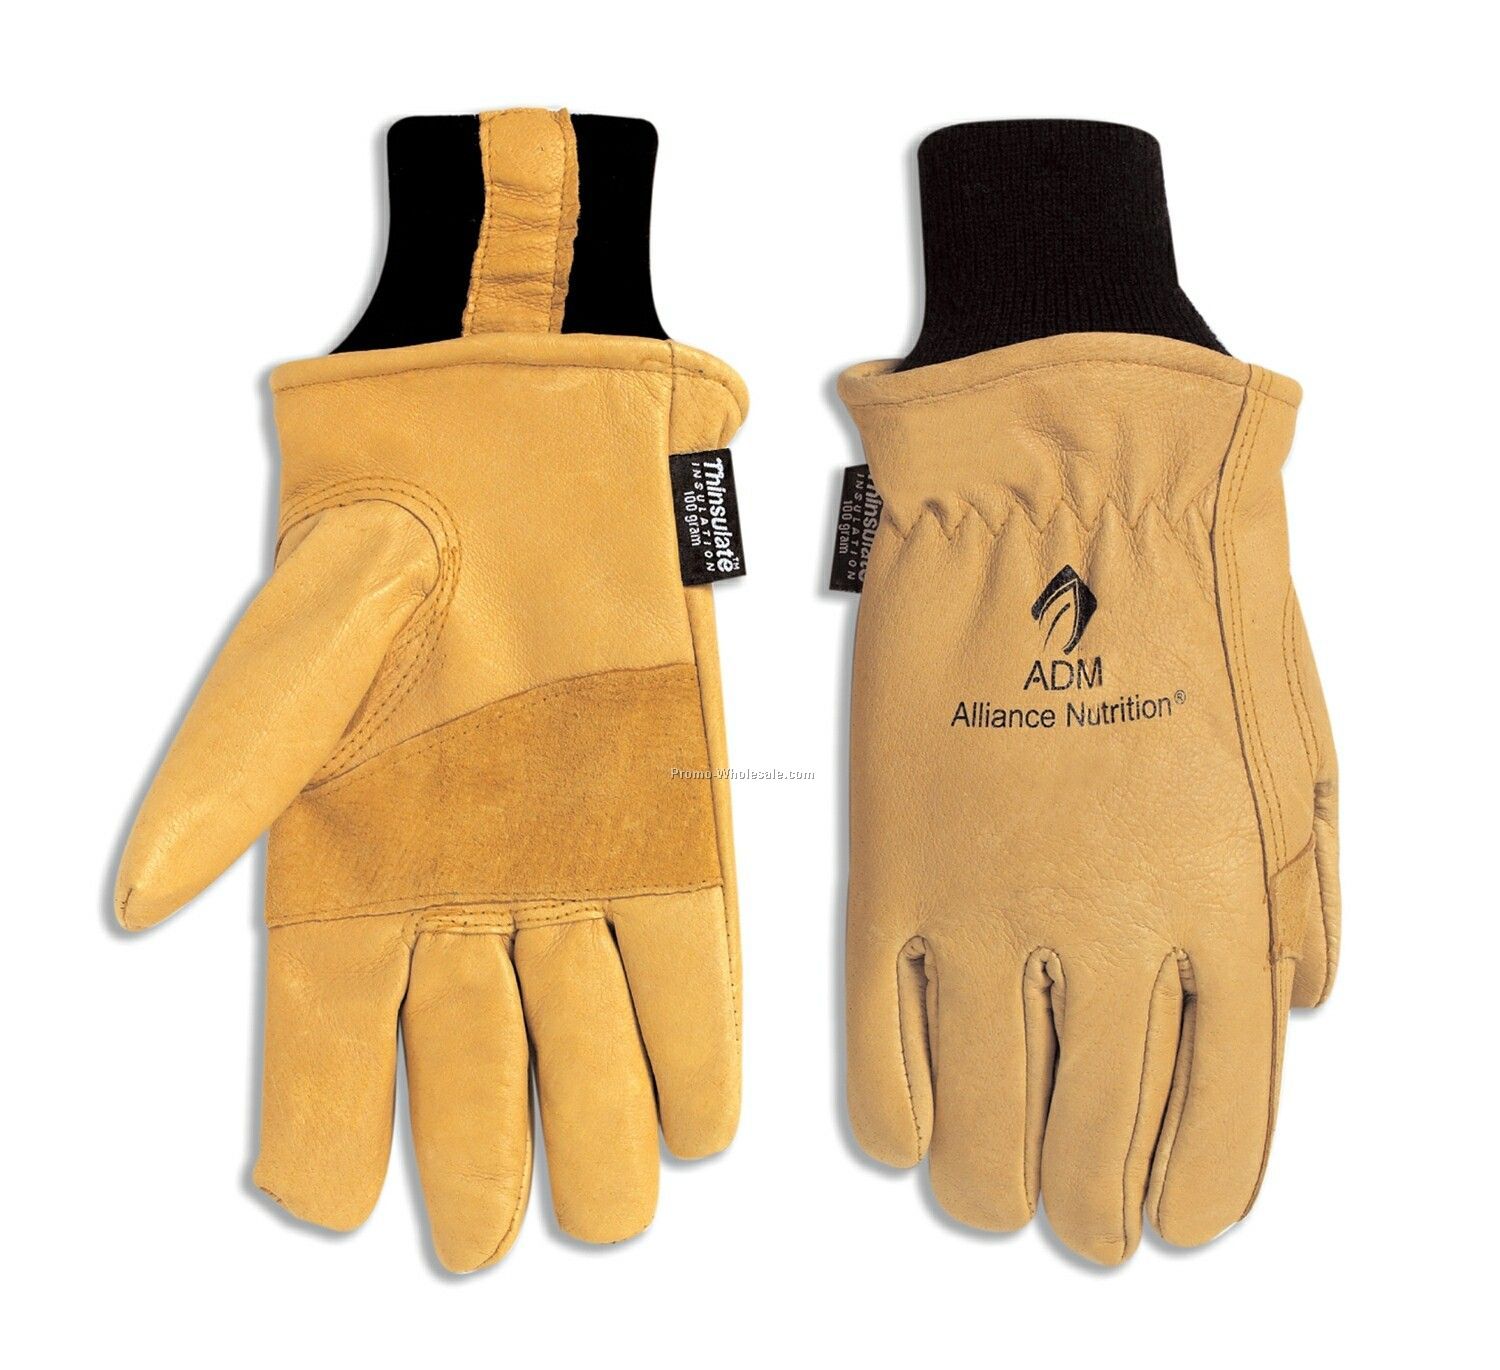 Thinsulate-lined Grain Pigskin Glove With Double Palm & Knit Wrist (S-xl)